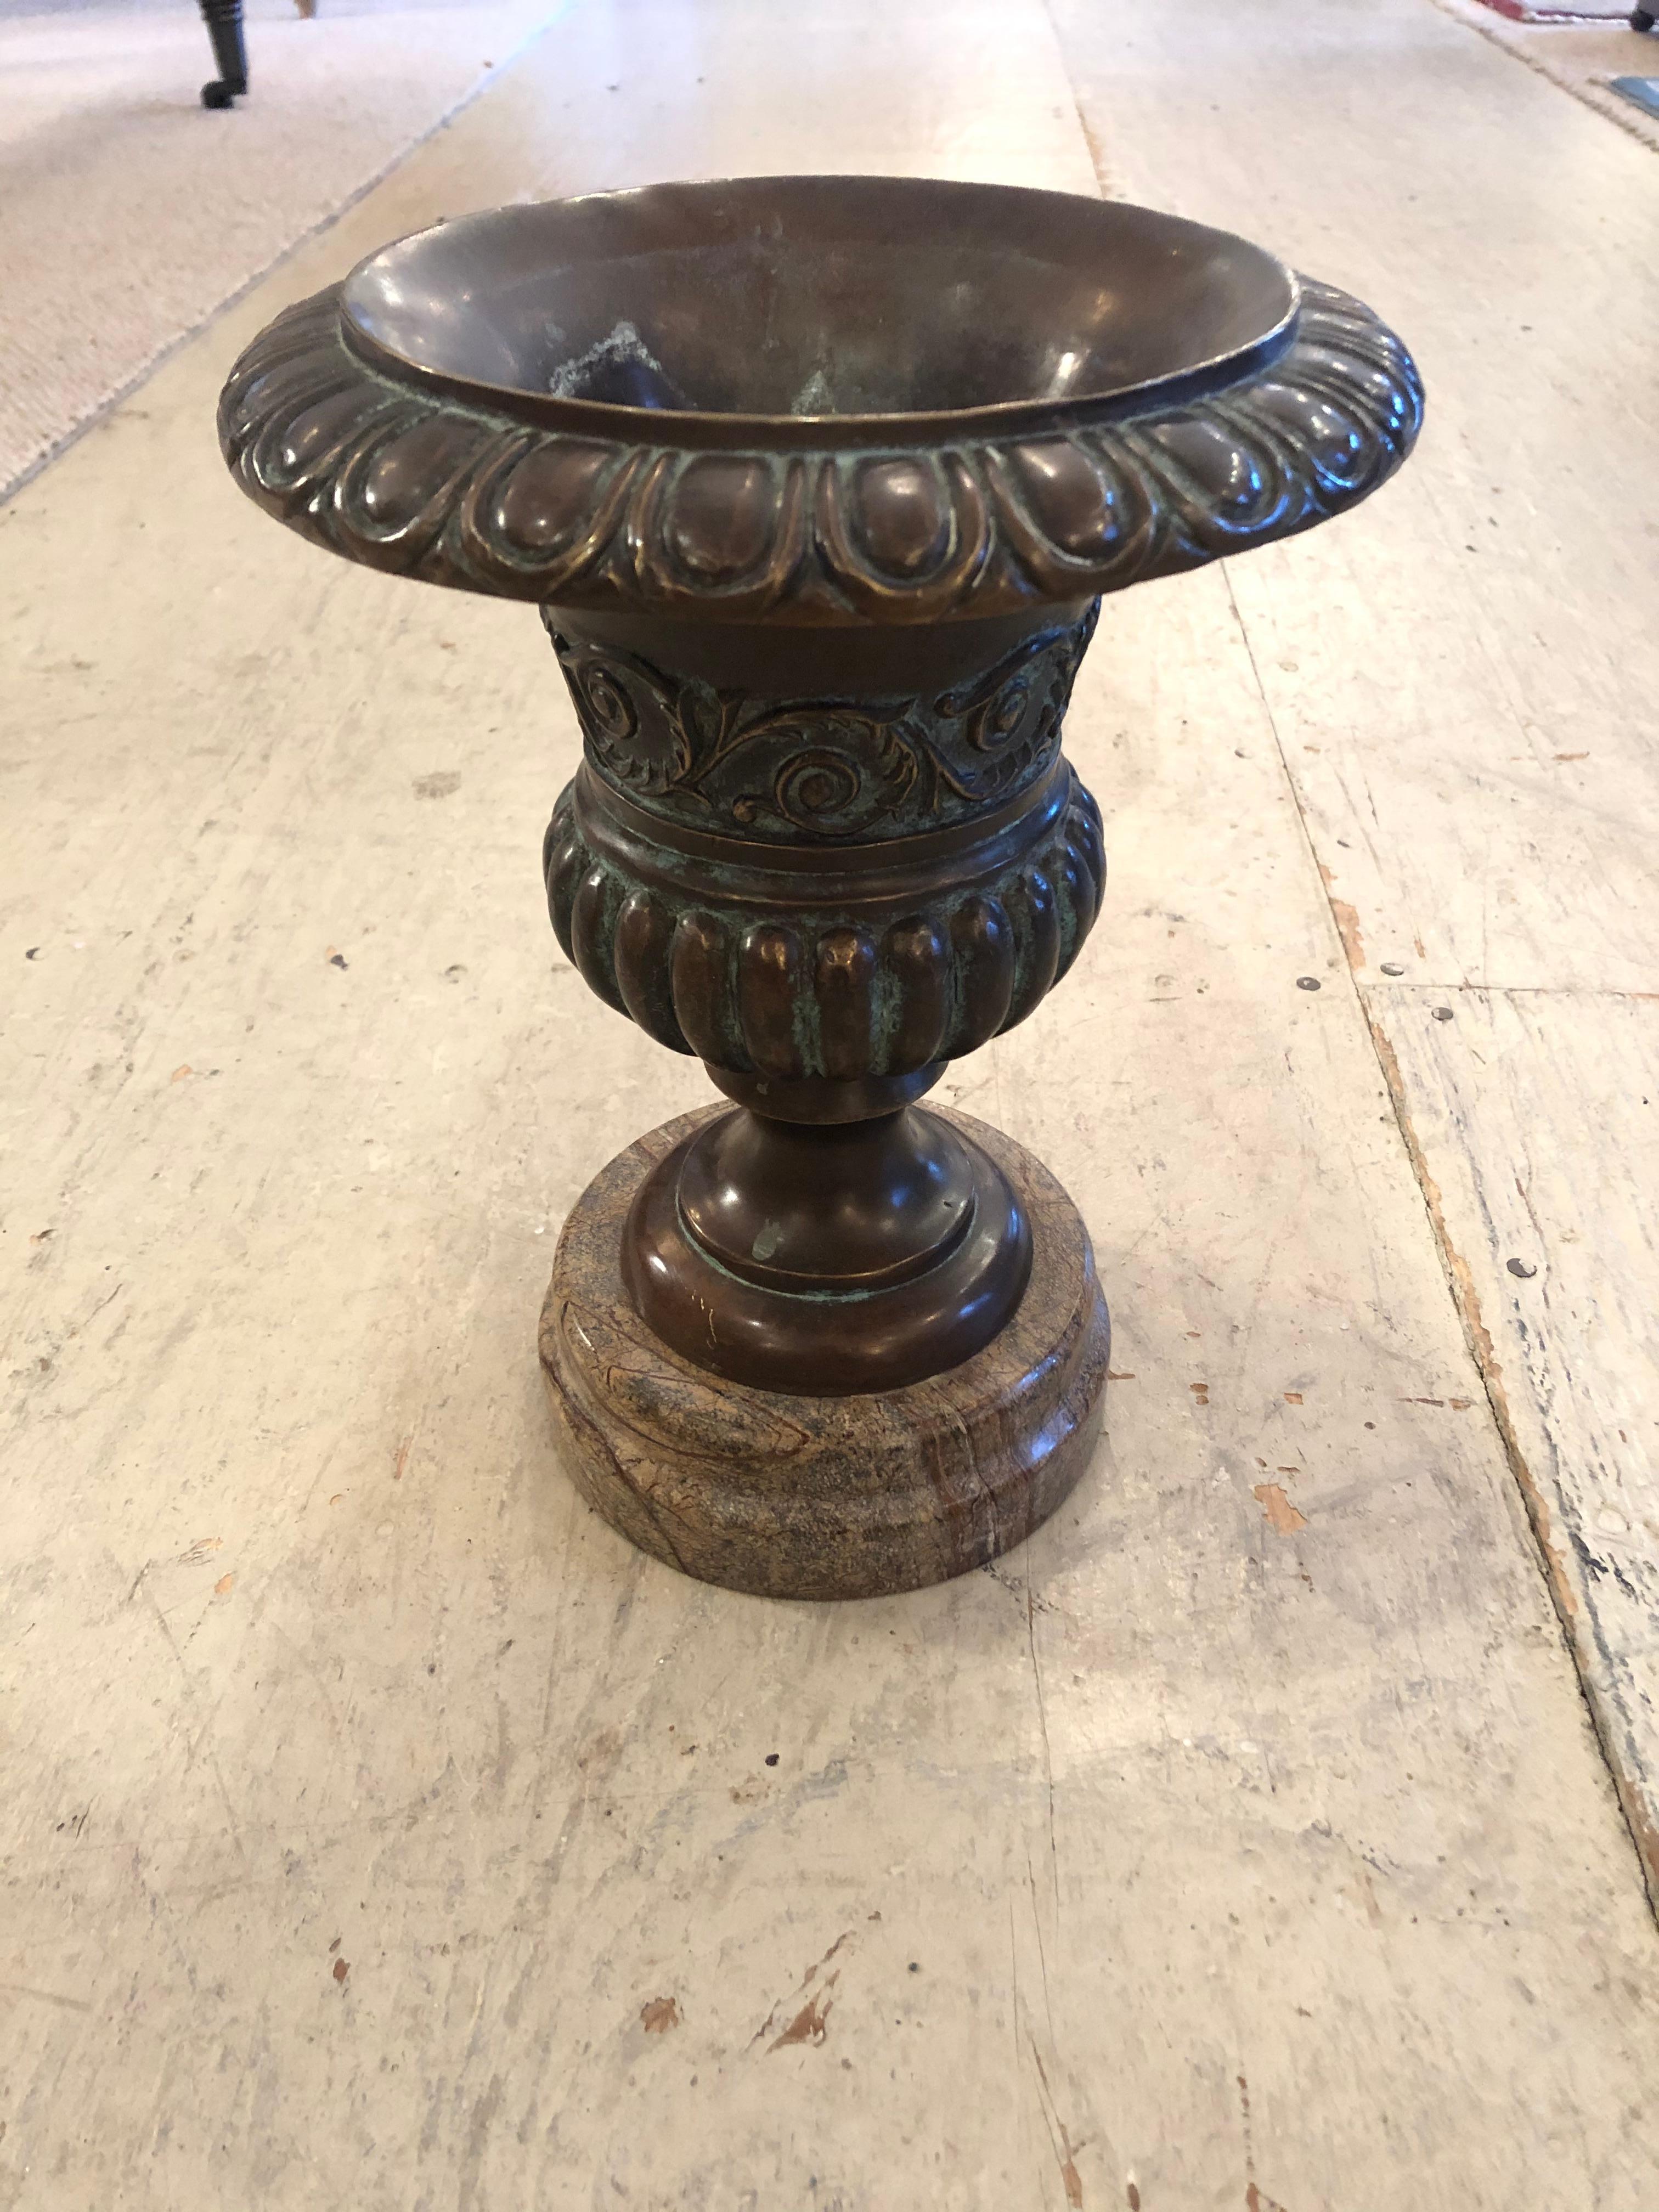 Luscious bronze urn on marble base having classical decoration and warm patina.